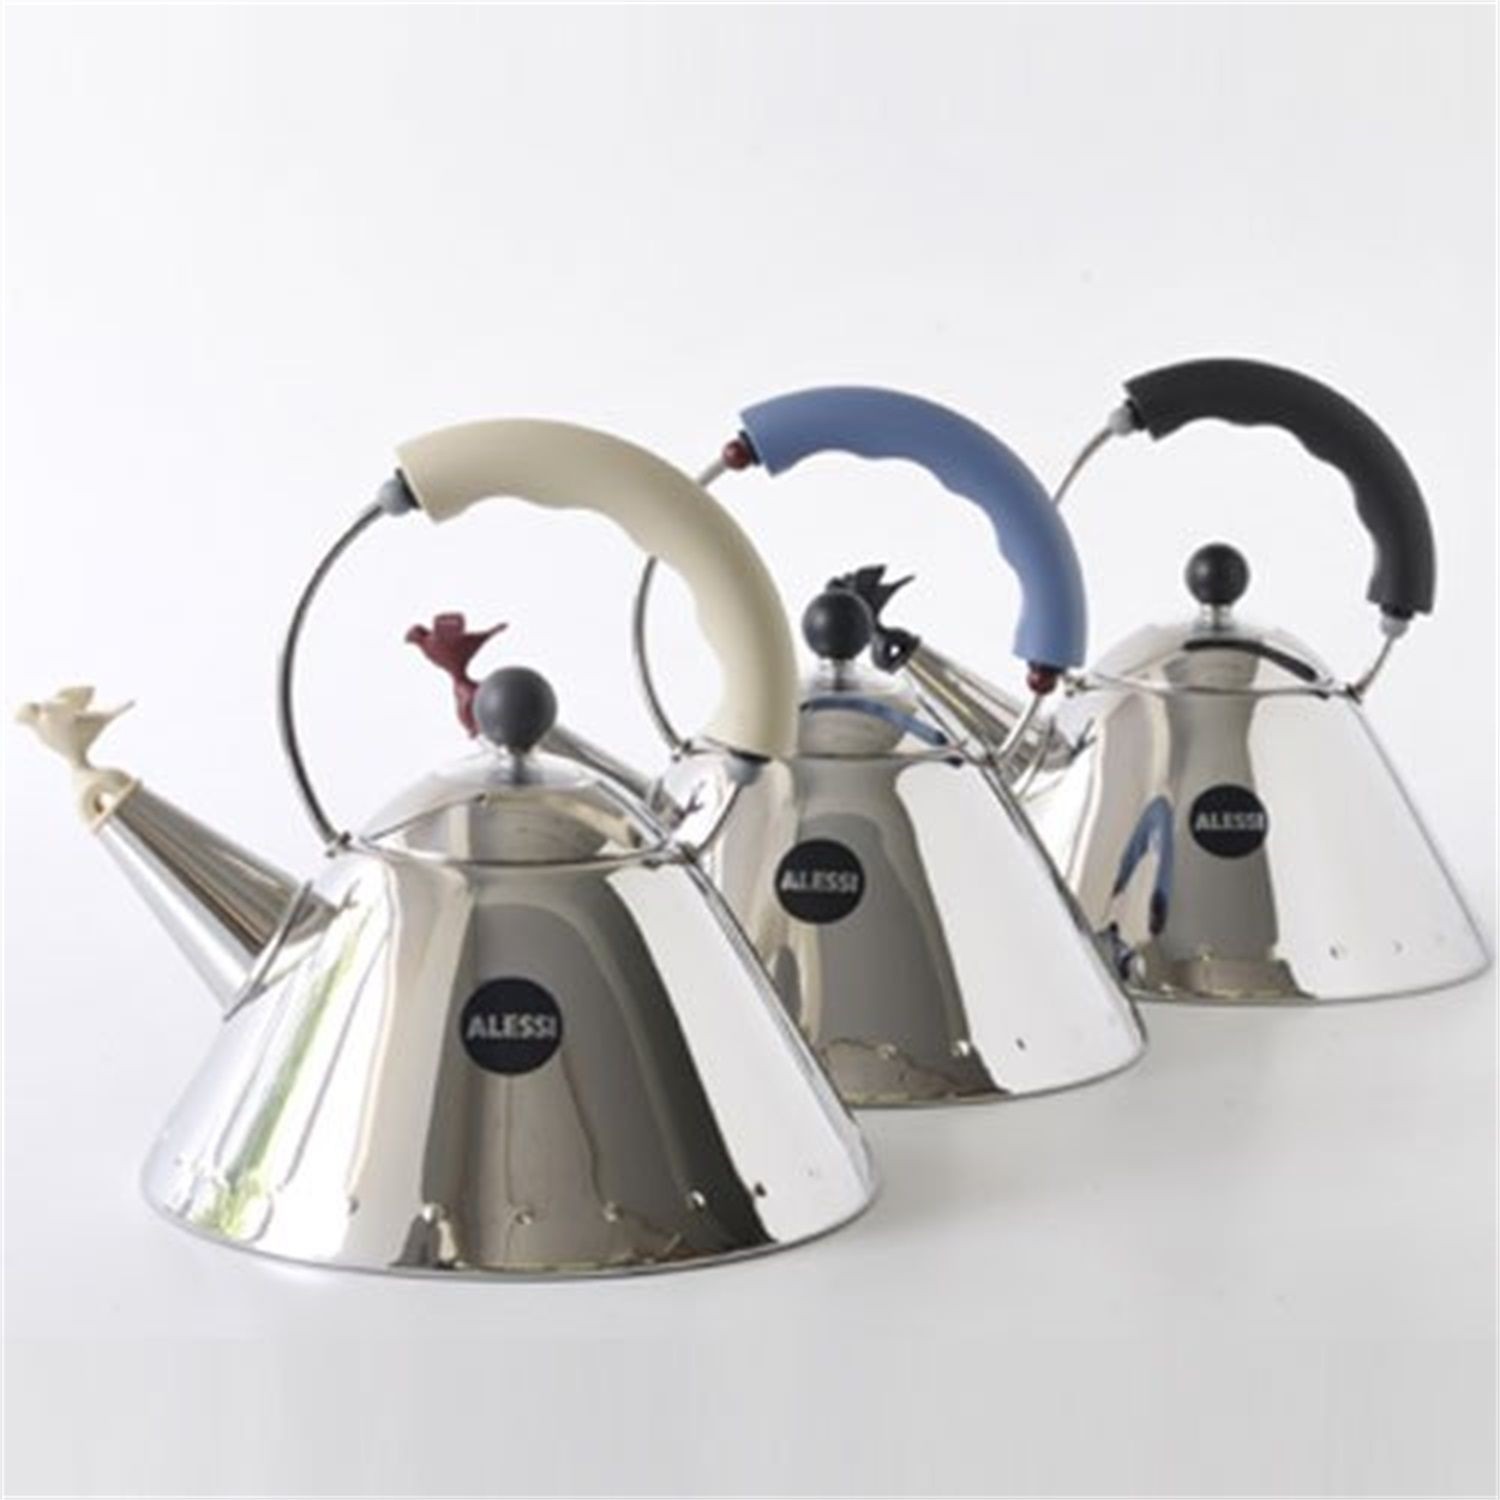 Alessi Michael Graves Kettle with Bird Whistle, Ivory Handle